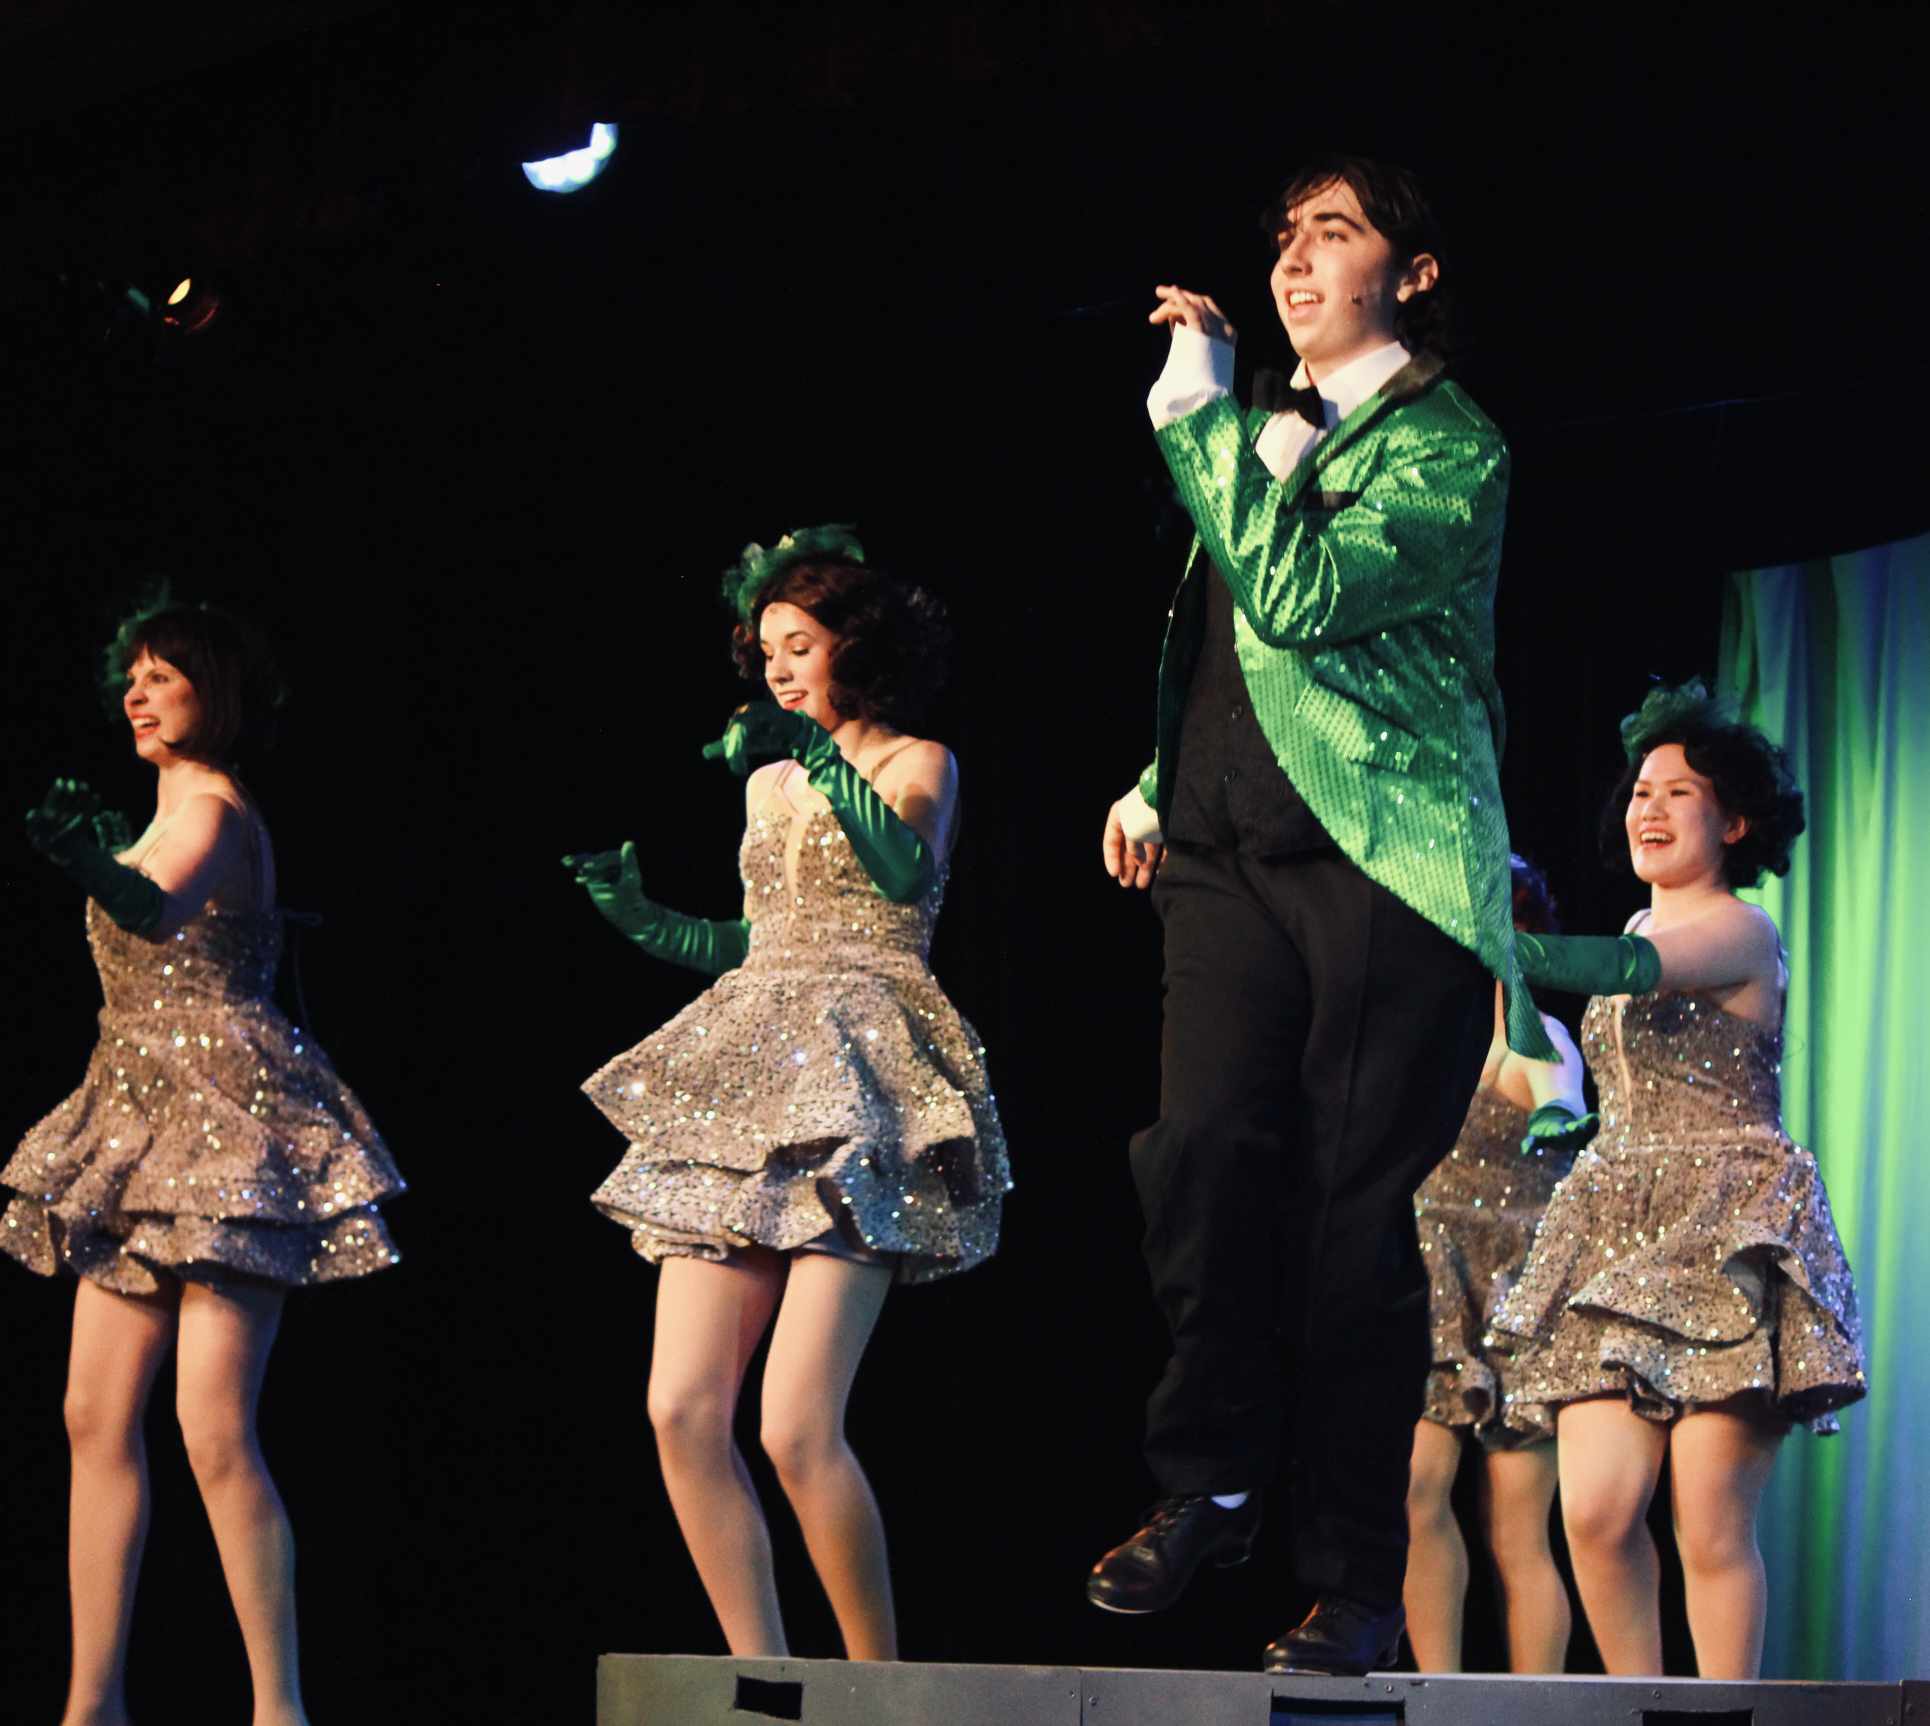 Tate Menges (in green) as Billy Lawlor and the Tap Corps in 42nd Street 📷 Emily Sinclair